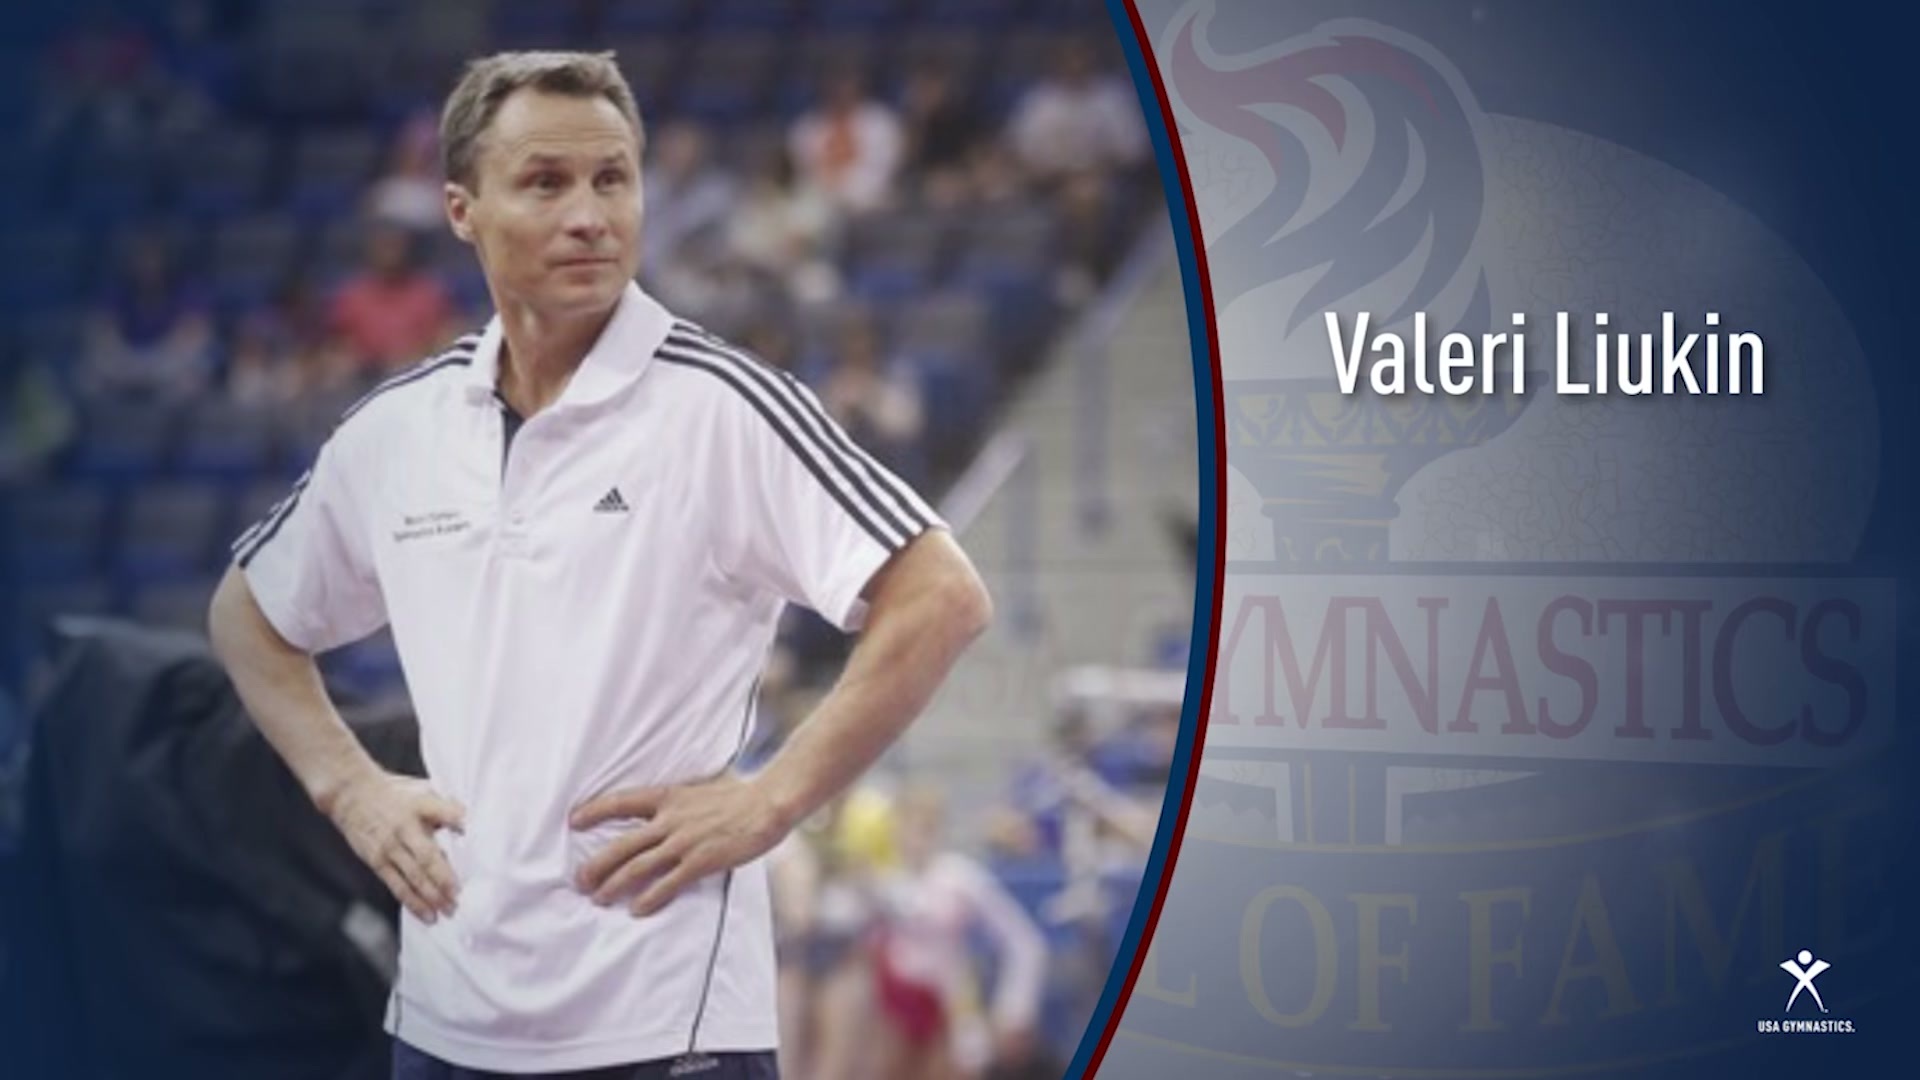 An image of Valeri Liukin. He is standing with his hands on his hips.